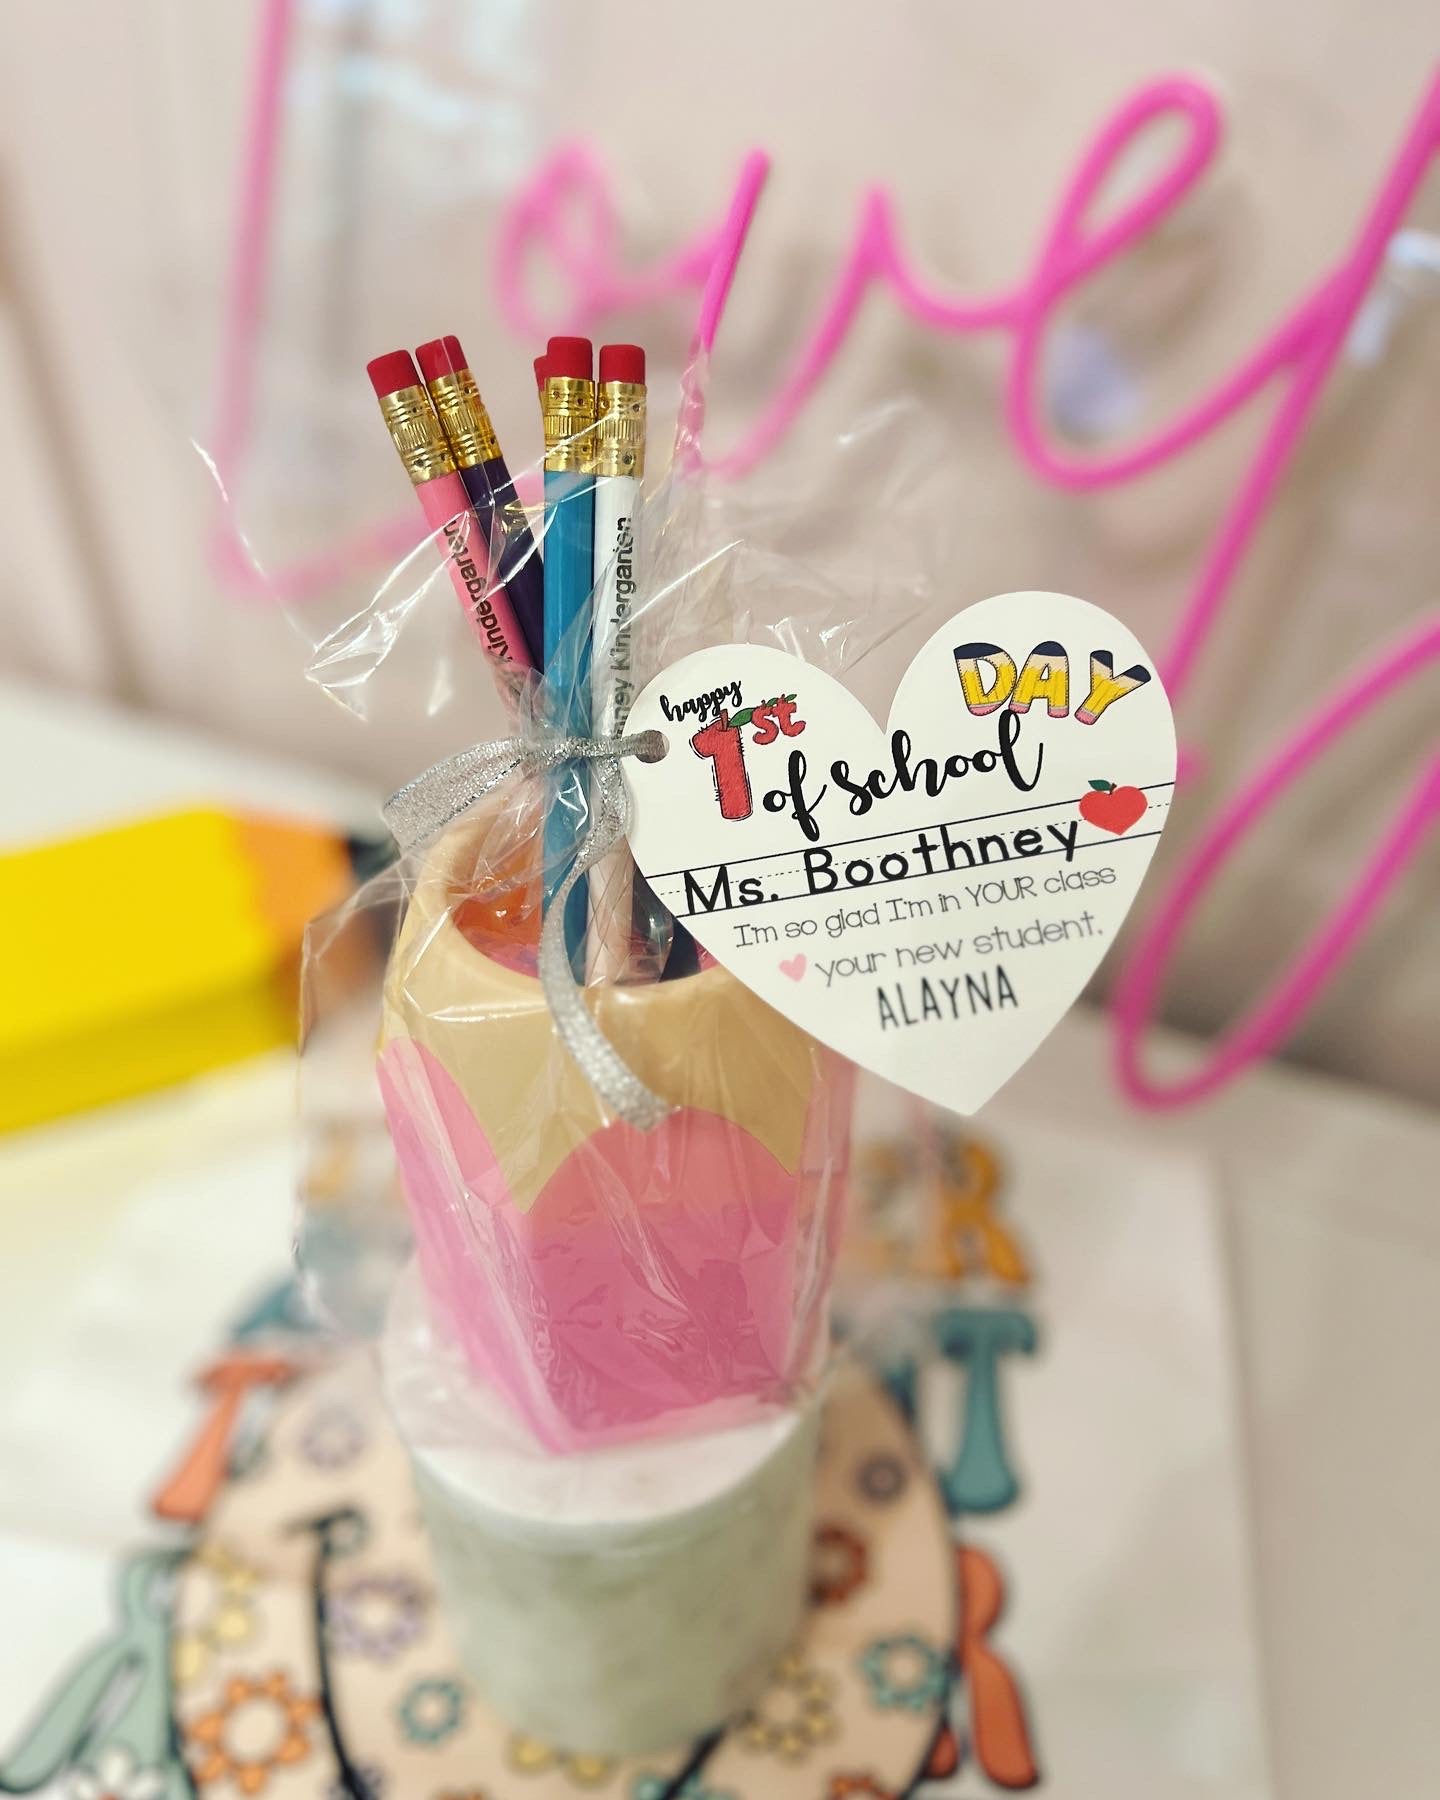 First day of school teacher gift! Engraved Pencils Back to School gift!Teachers Name personalized! Gift wrap w/heart card, pencil cup holder